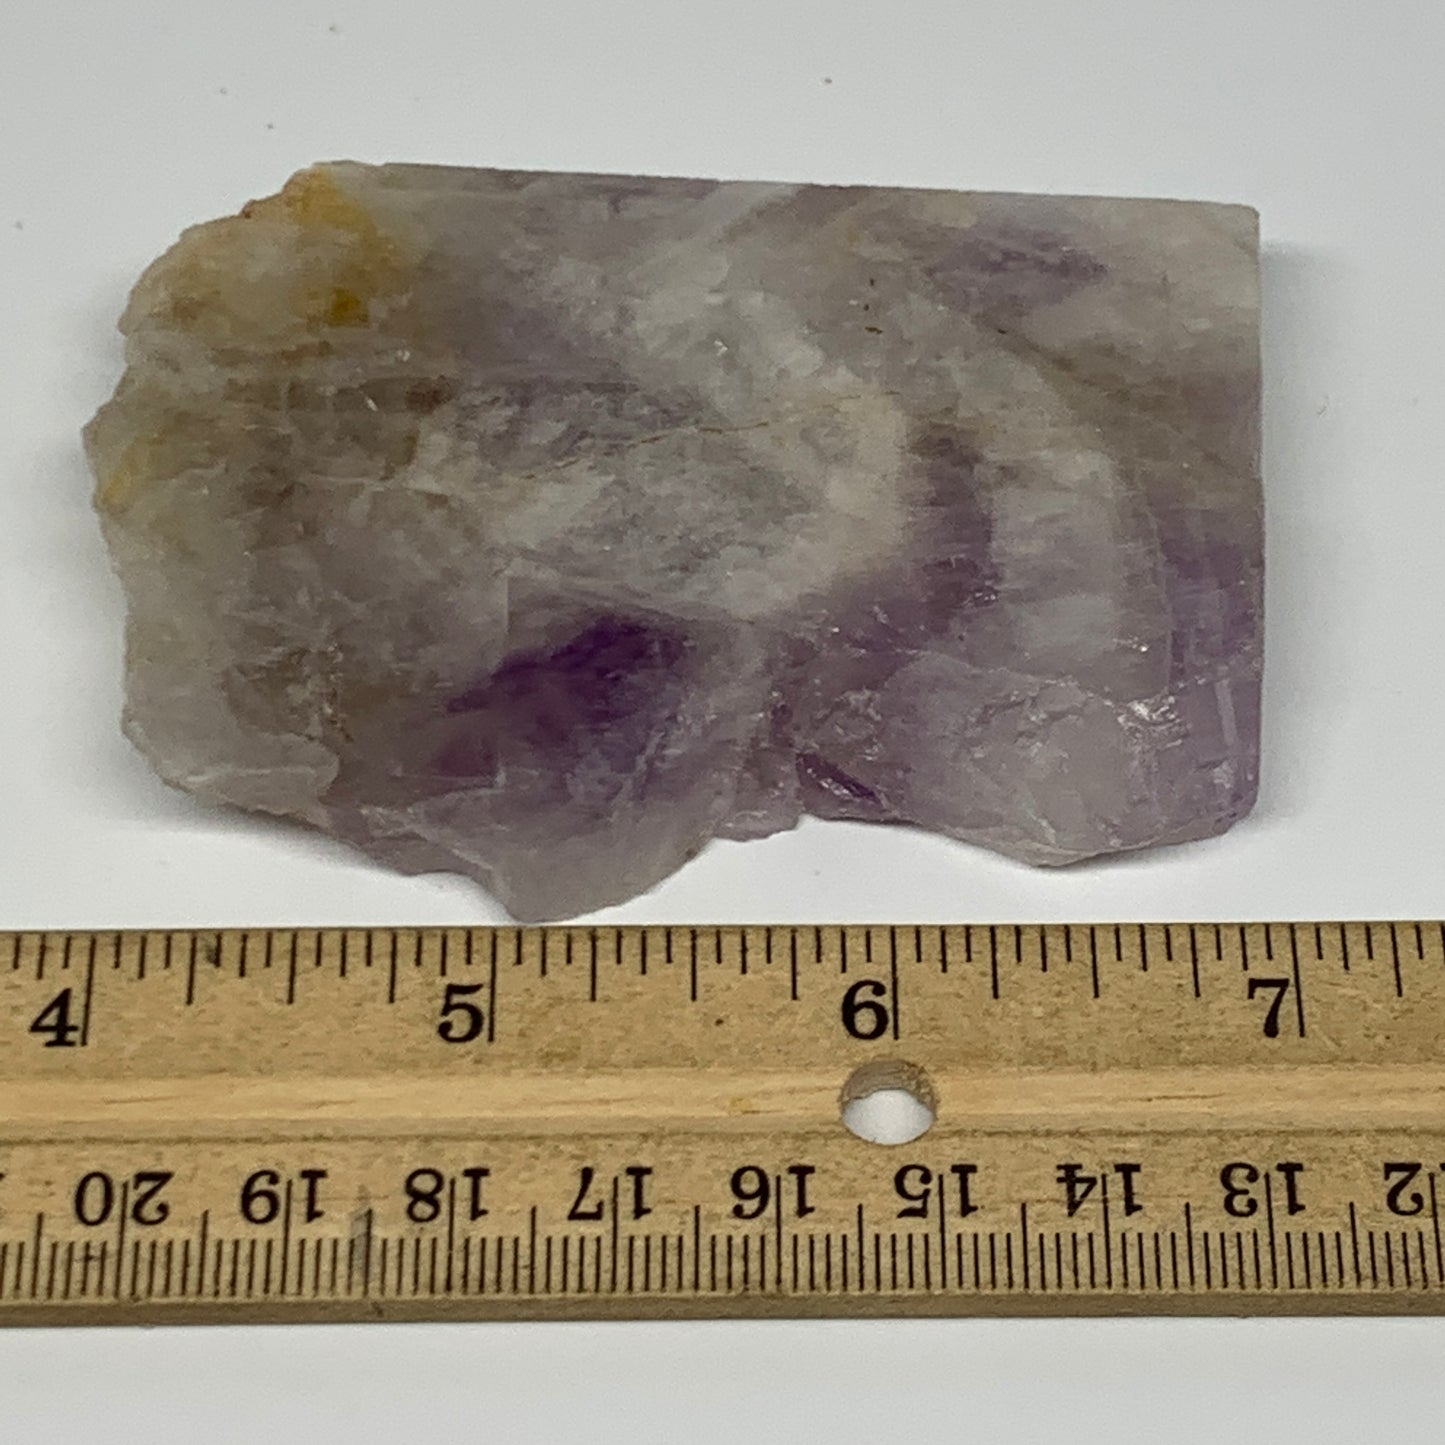 97.7g, 3.1"x2.2"x0.5", One face polished Banned Amethyst, One face semi polished